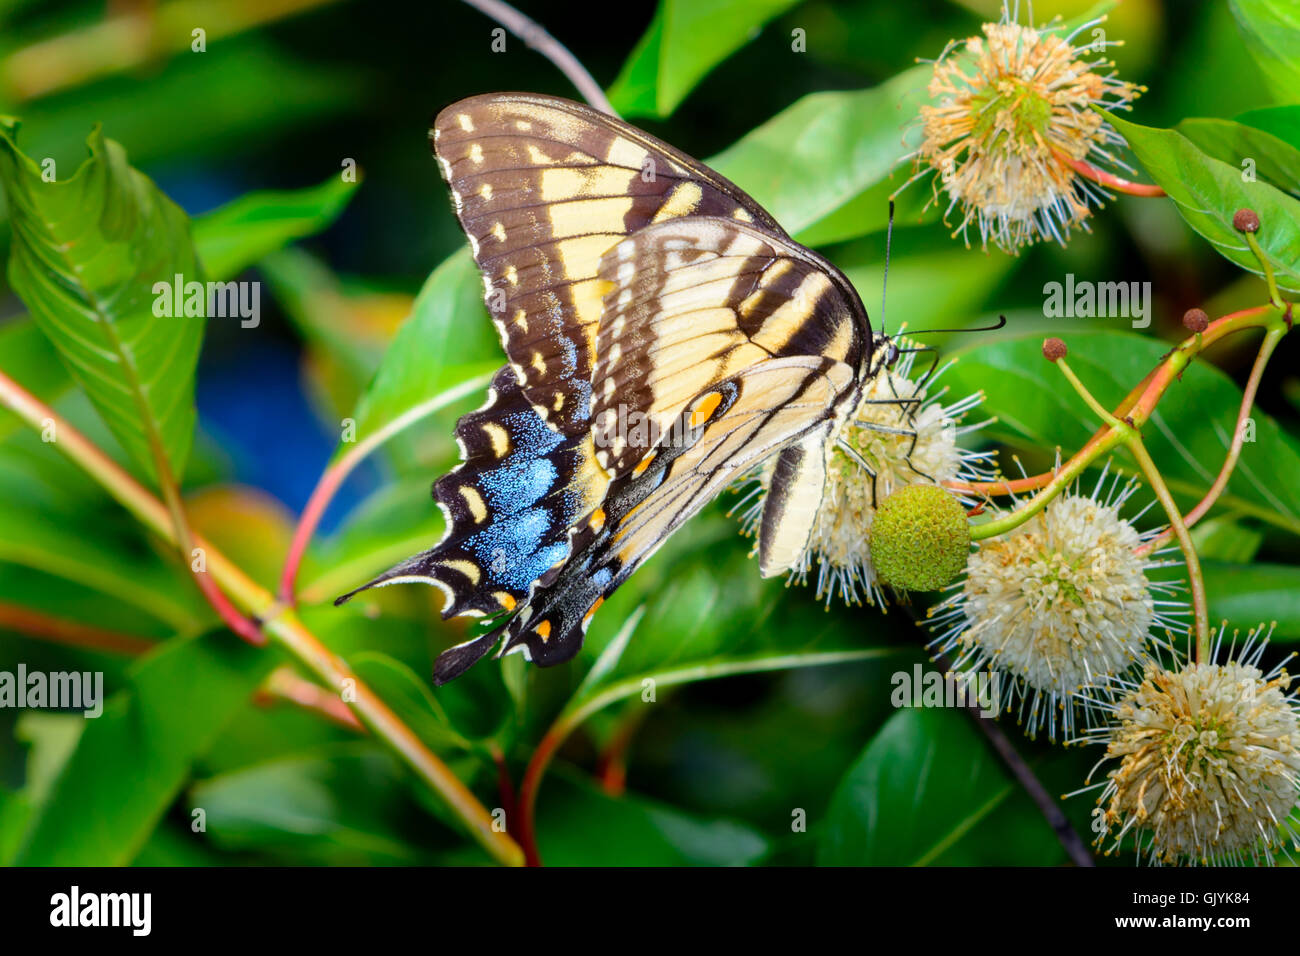 Eastern tiger swallowtail (Papilio glaucus) butterfly with vivid blue yellow and black. Stock Photo